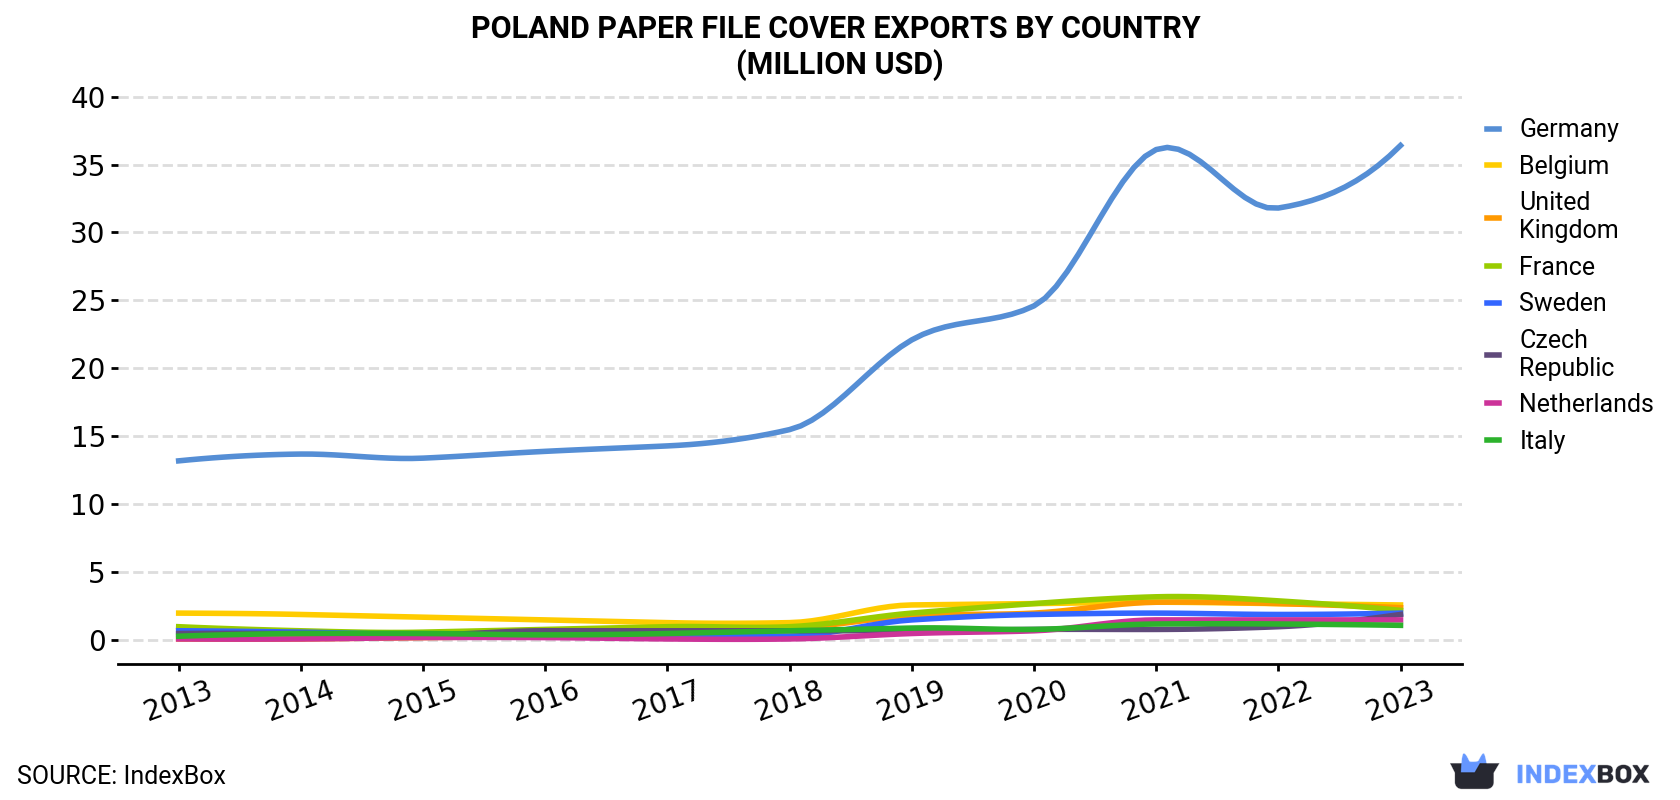 Poland Paper File Cover Exports By Country (Million USD)